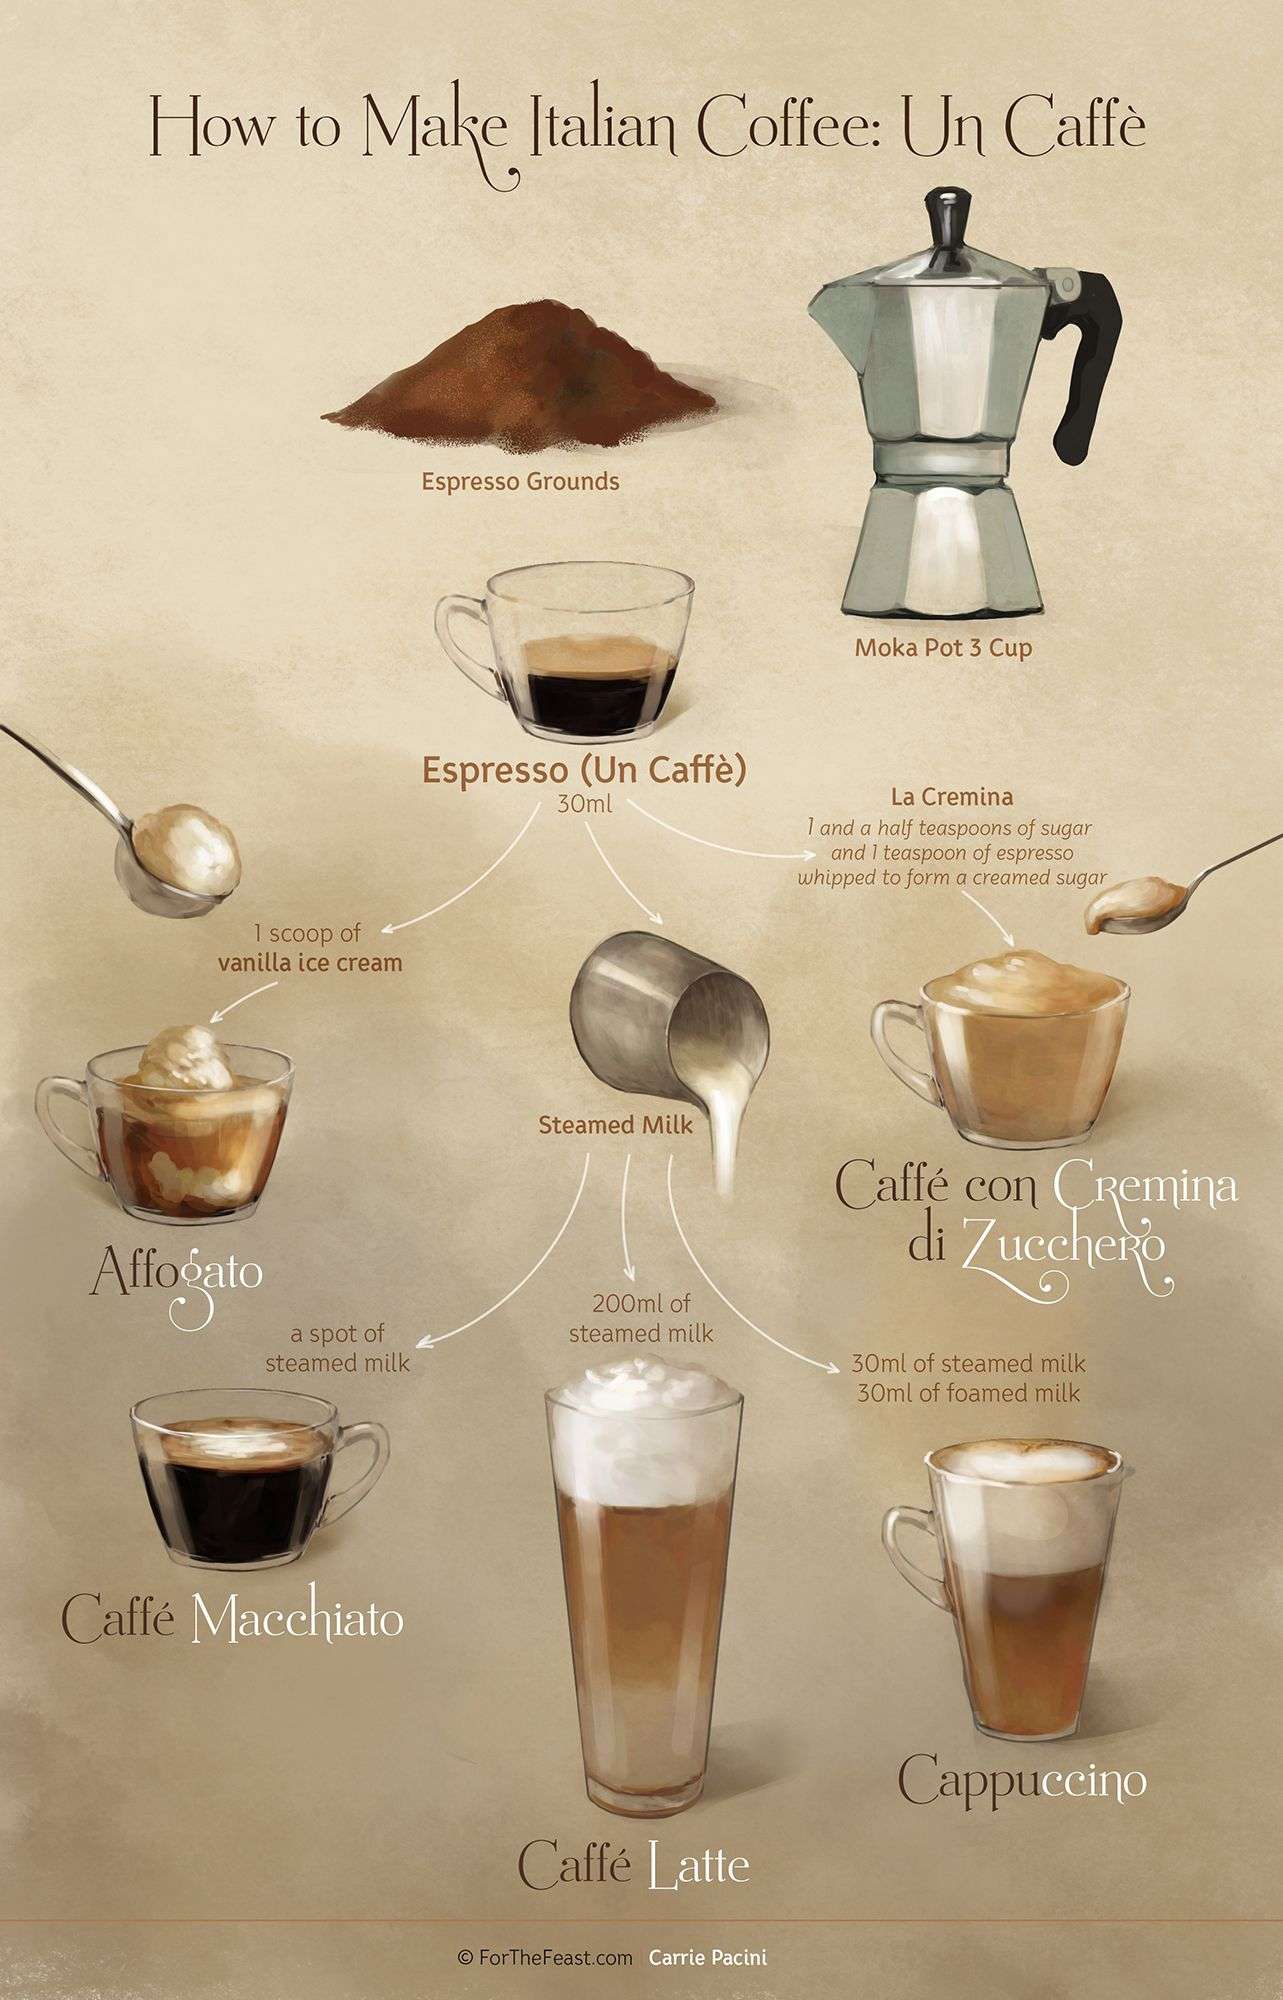 How to Make Espresso and Other Popular Coffee Drinks ...